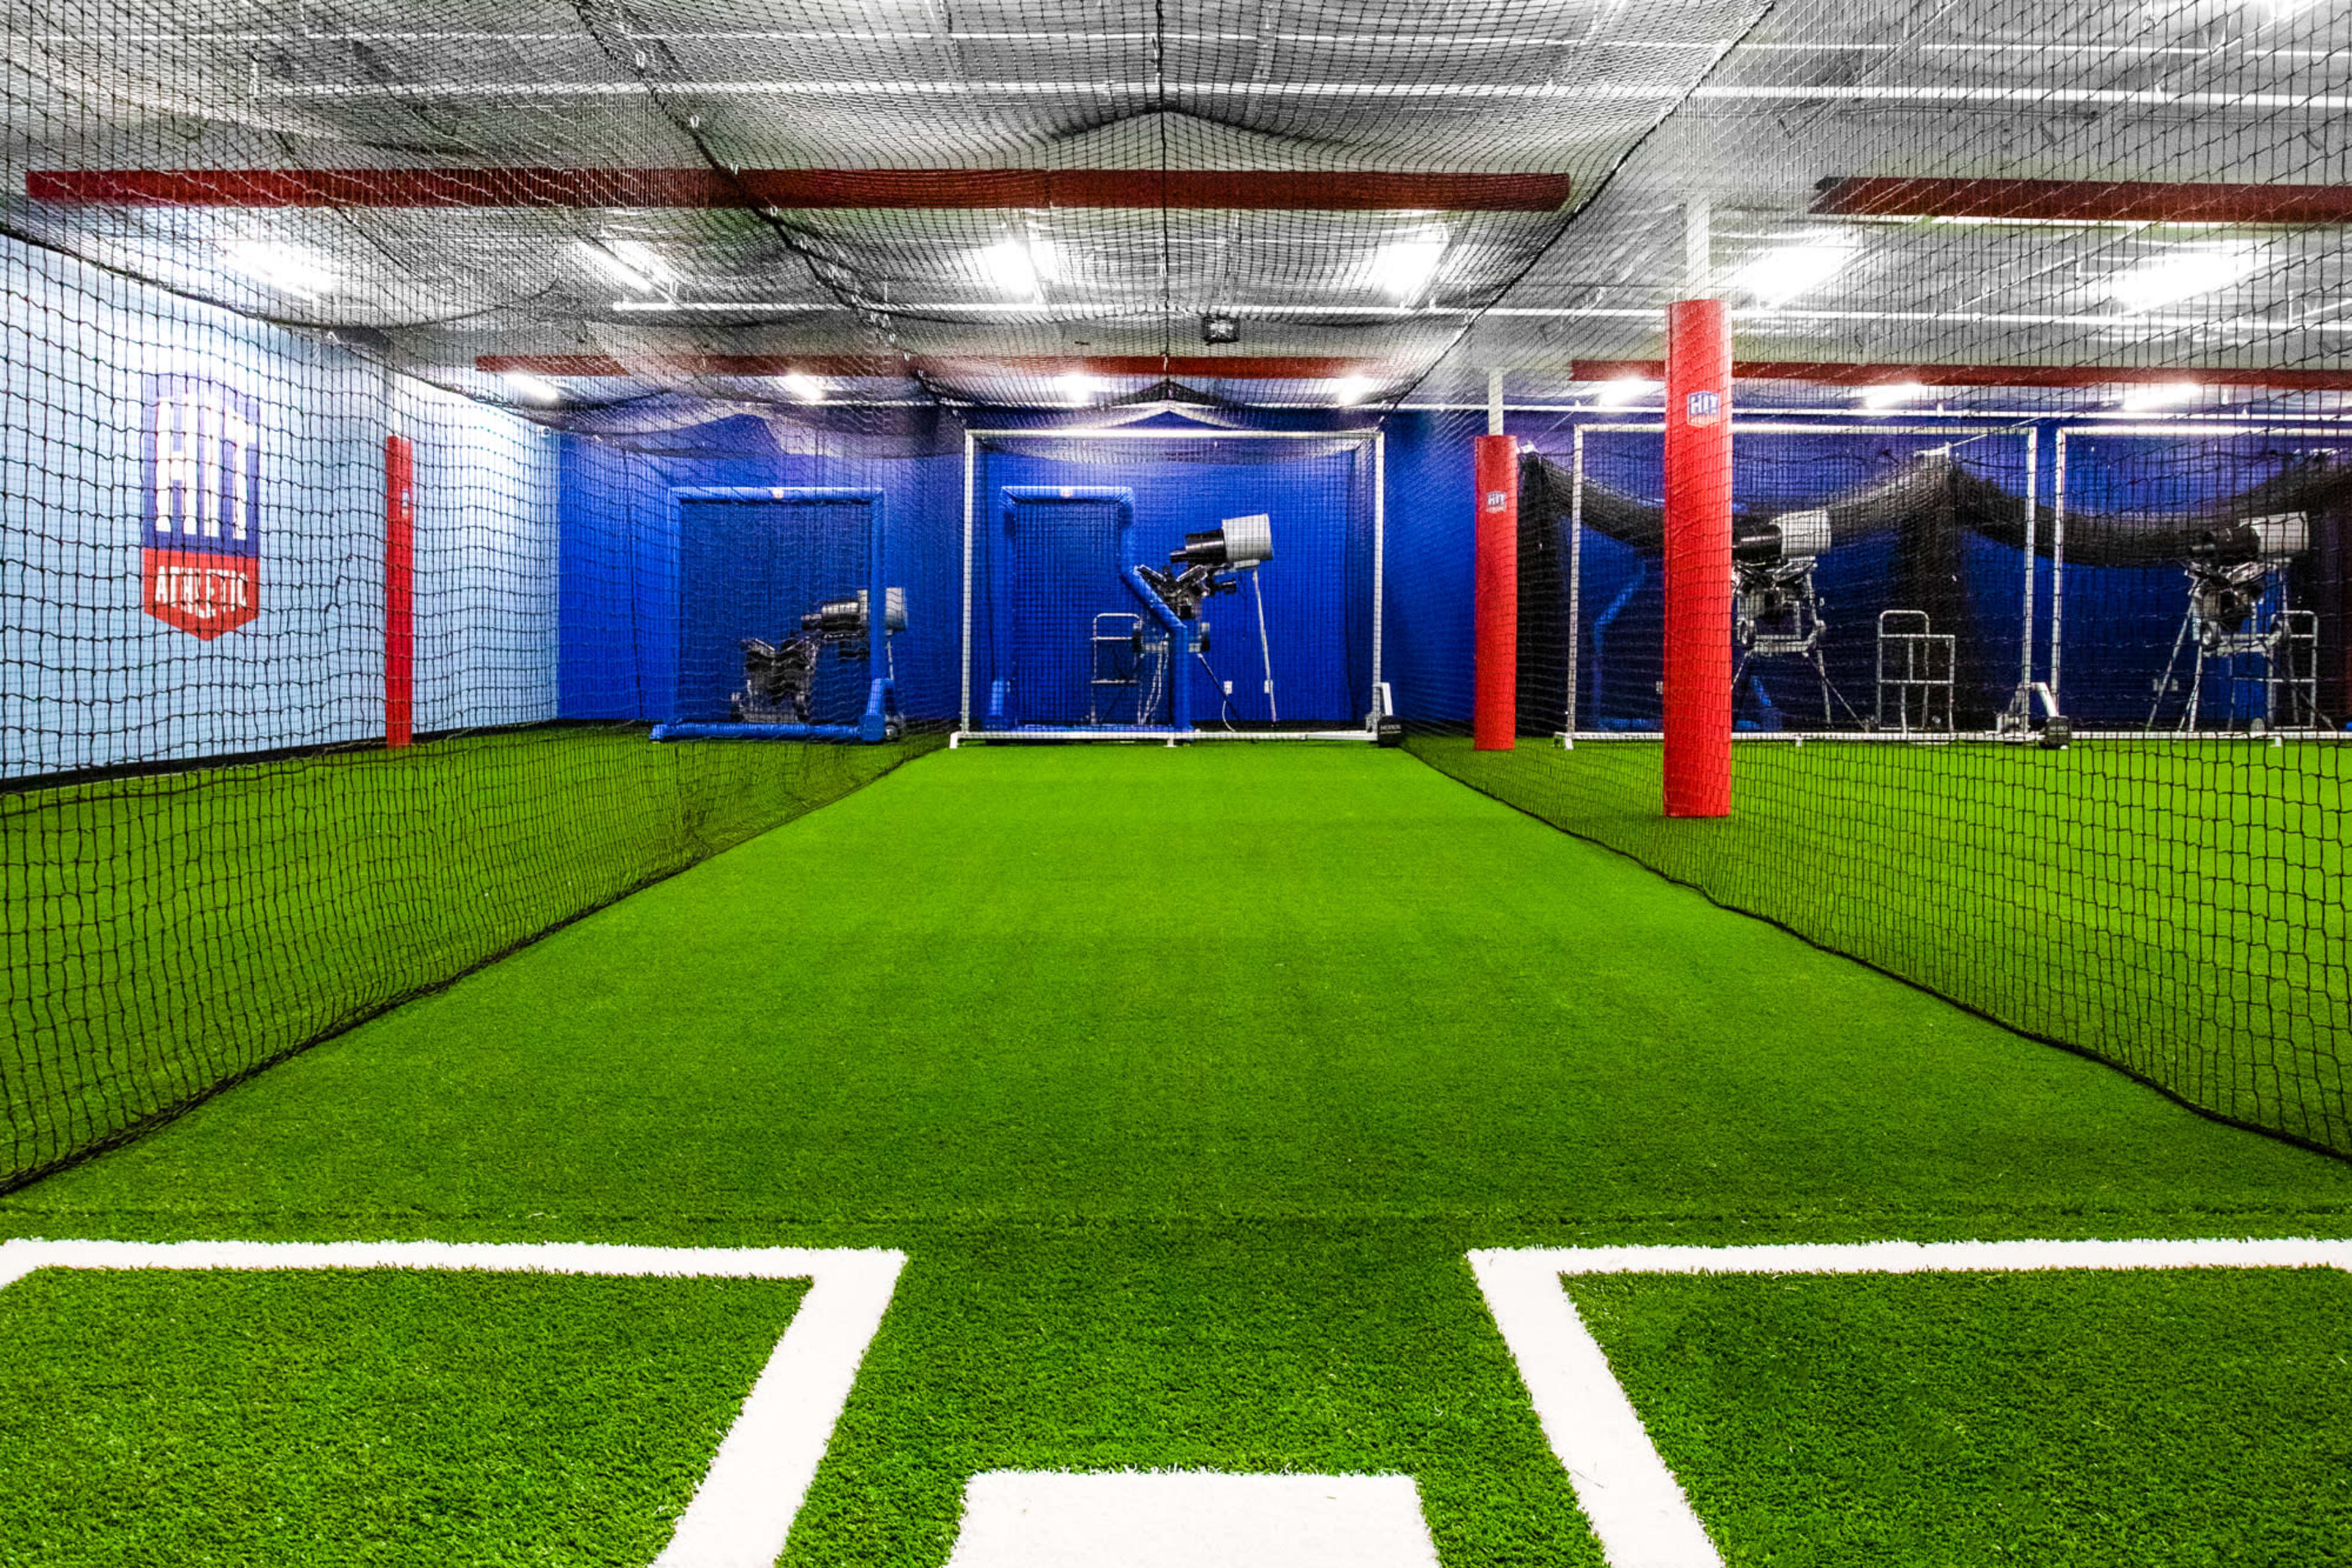 The Best Baseball Batting Cages or Facilities For Rent By The Hour